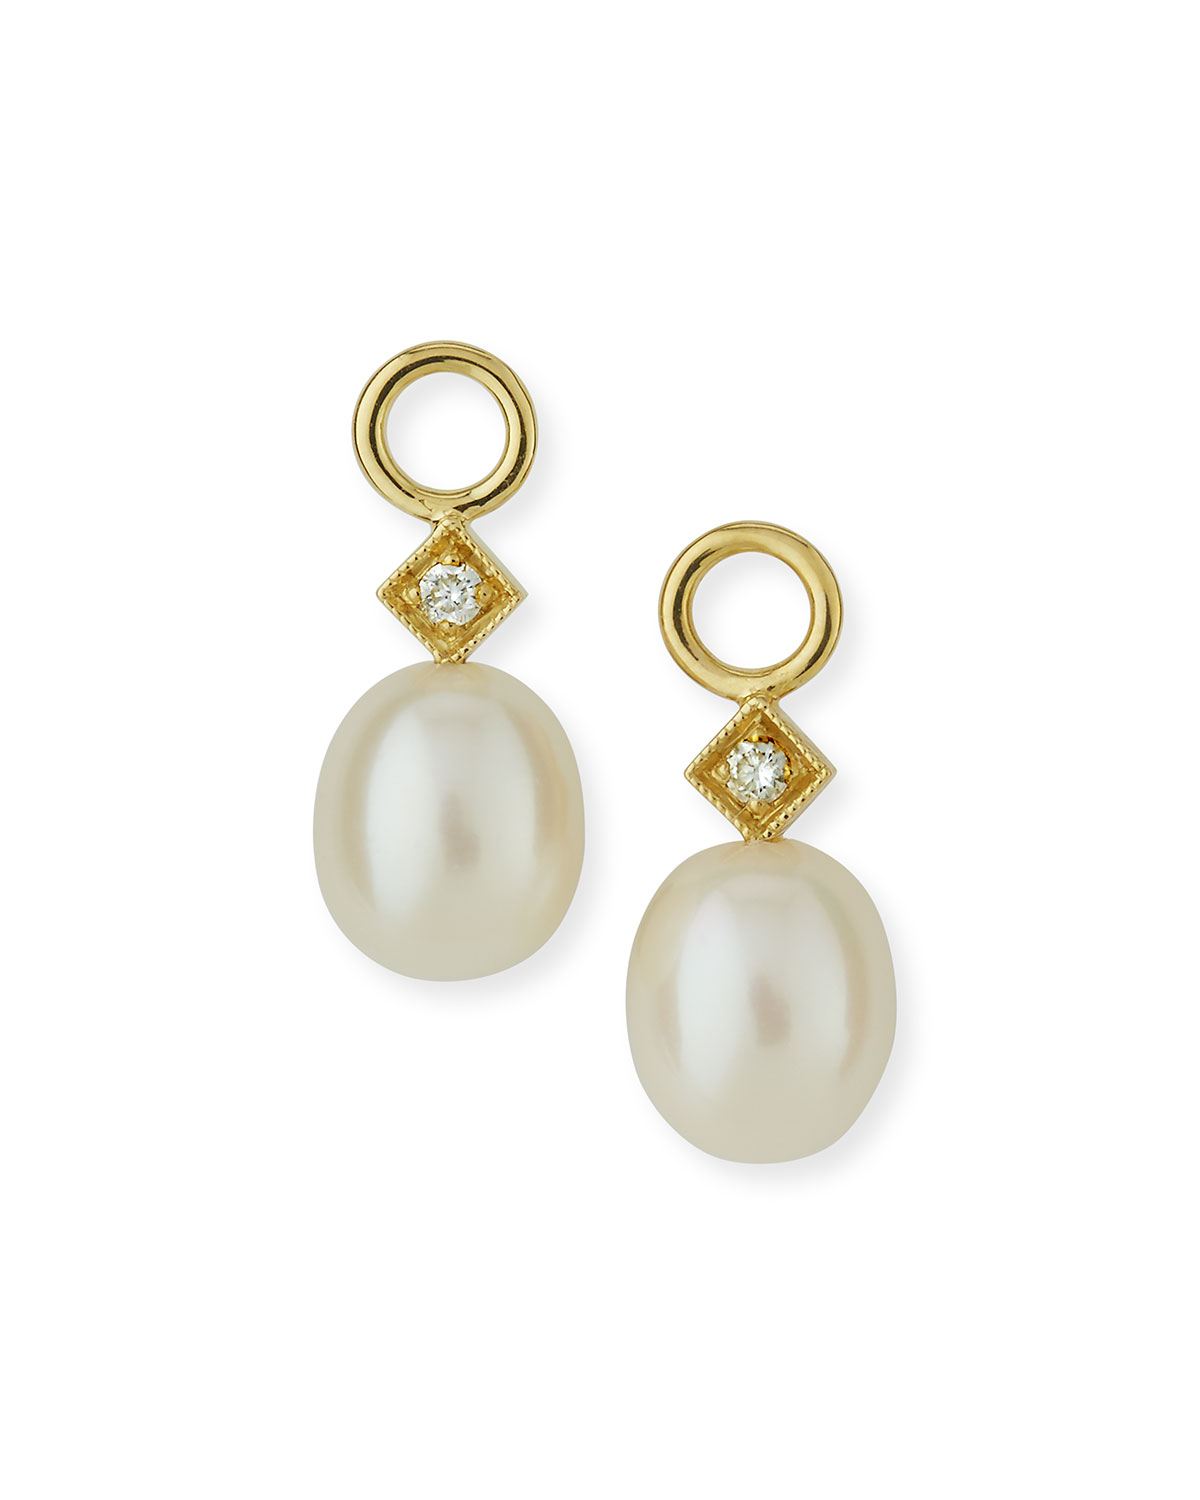 JUDE FRANCES WHITE PEARL BRIOLETTE EARRING CHARMS,PROD172000174